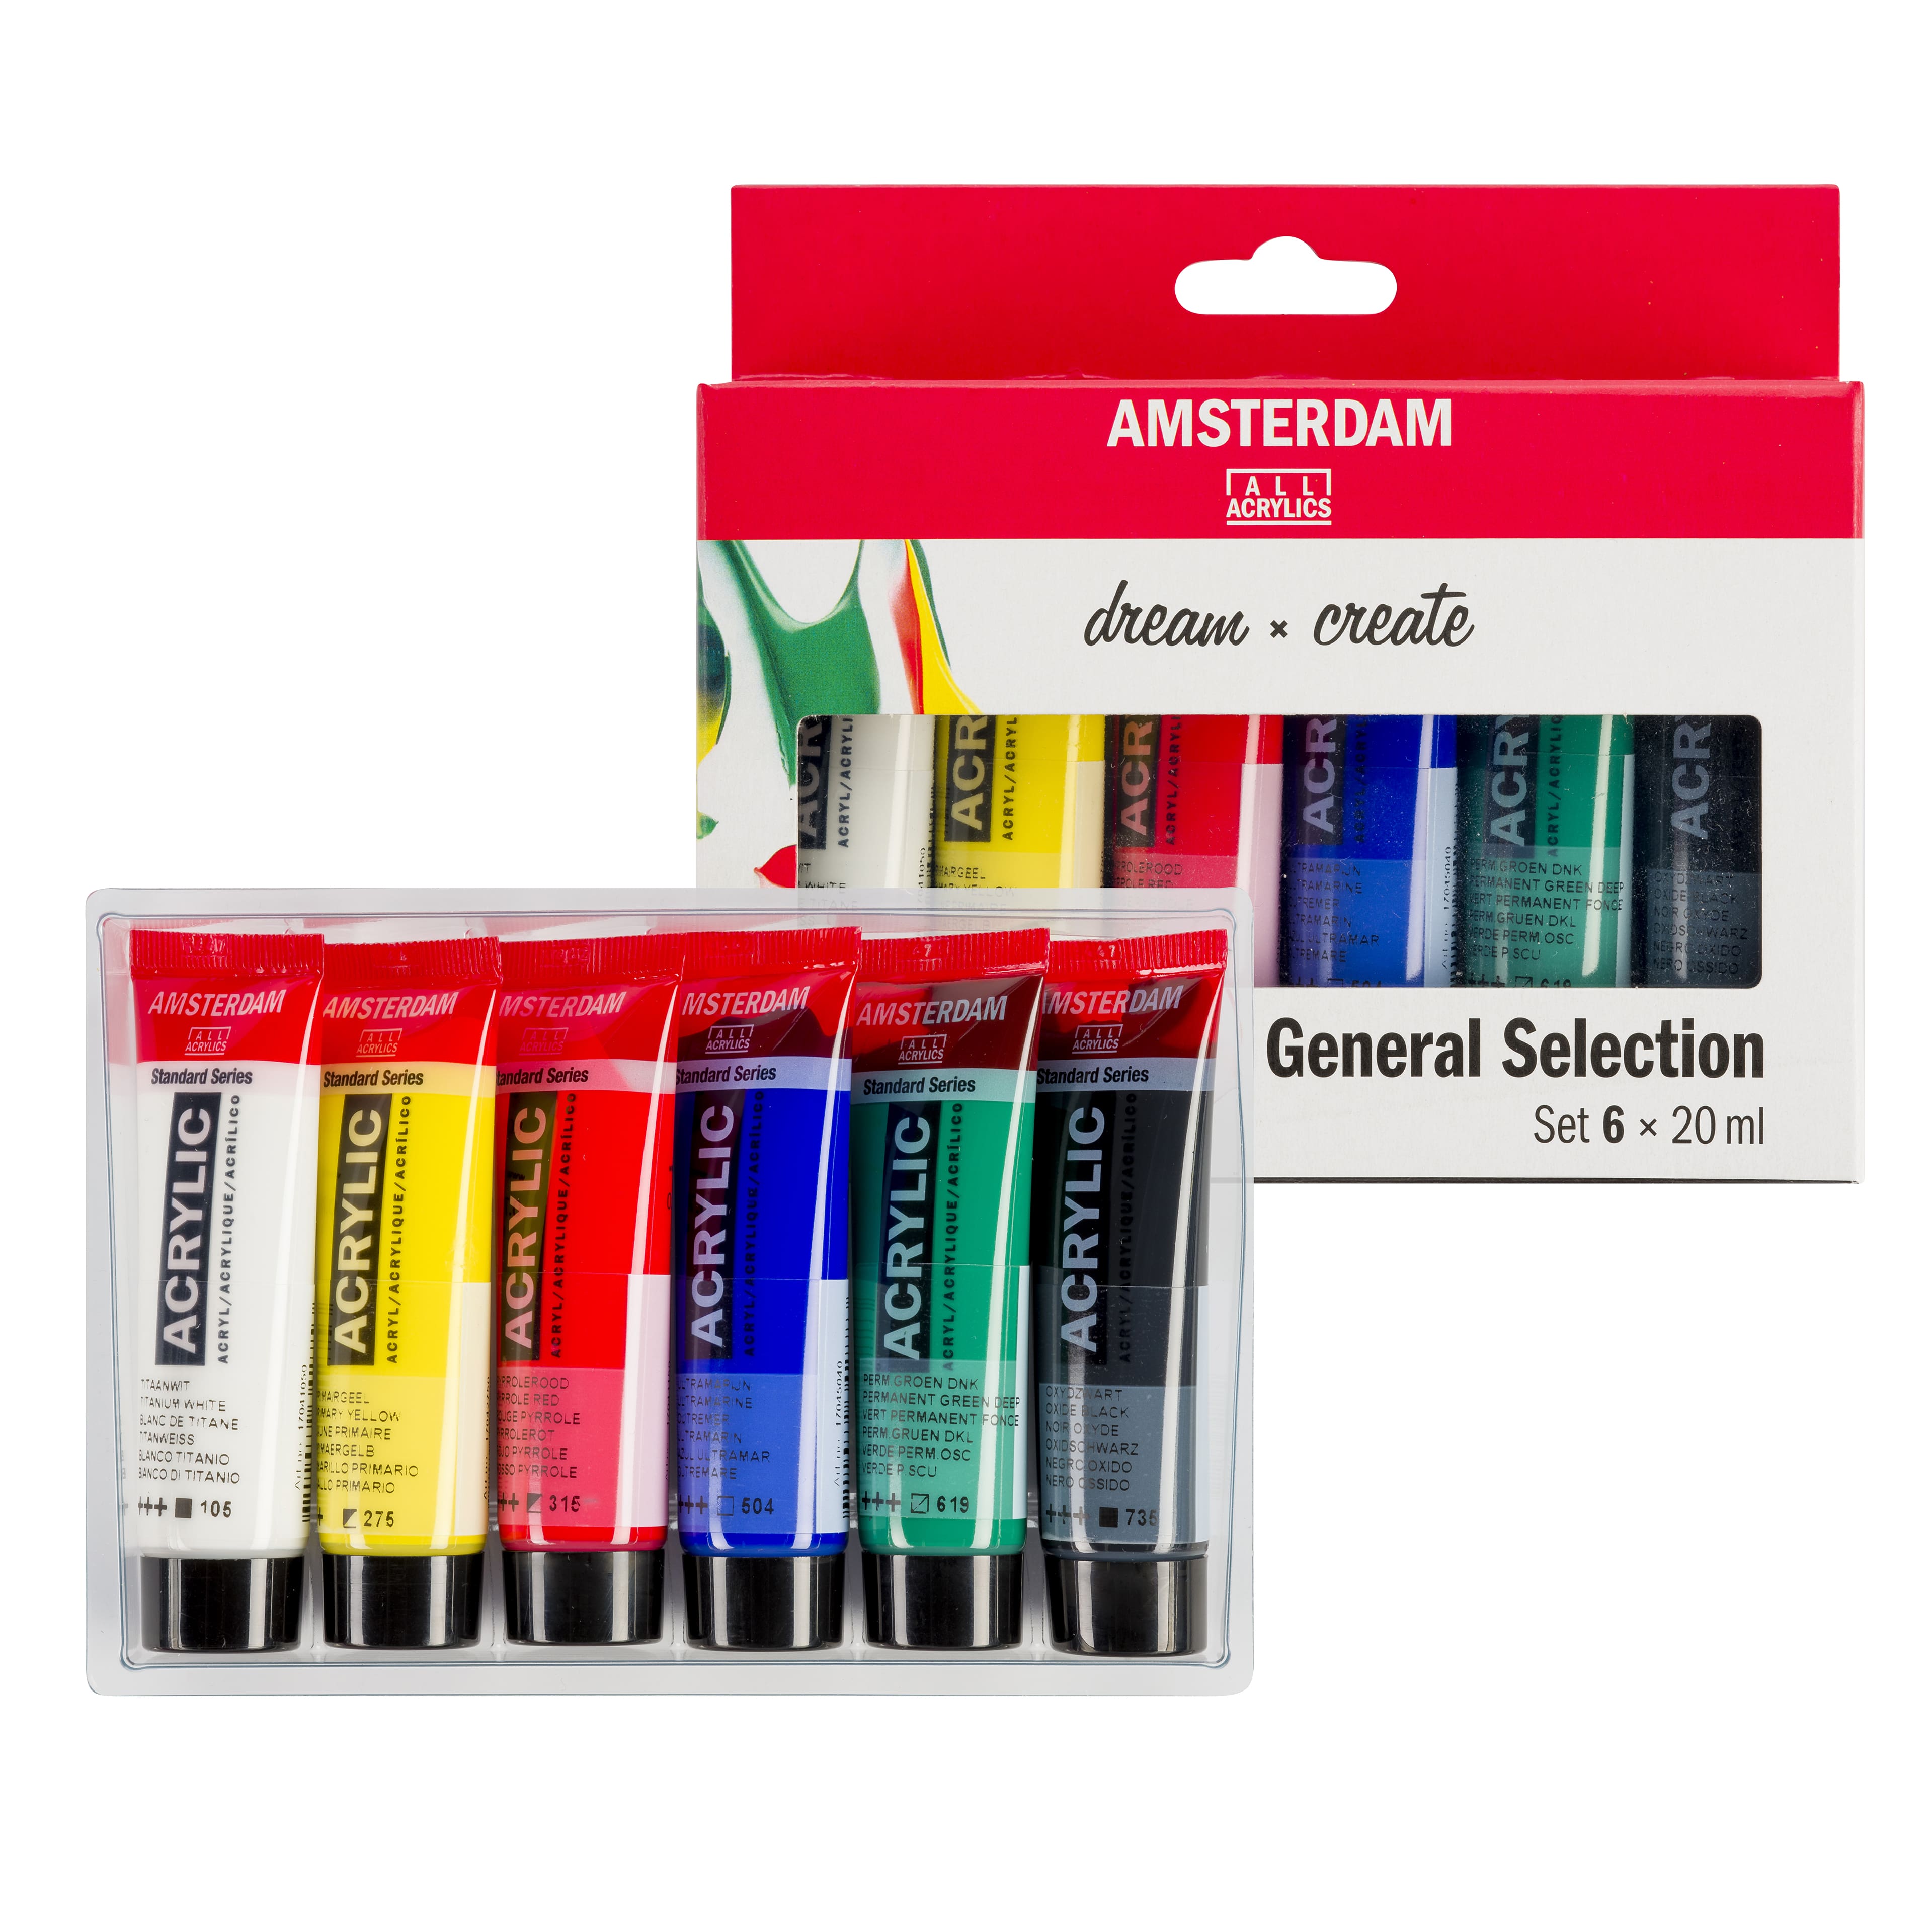 Amsterdam Standard Acrylic Paint, 5 Color Primary Set 